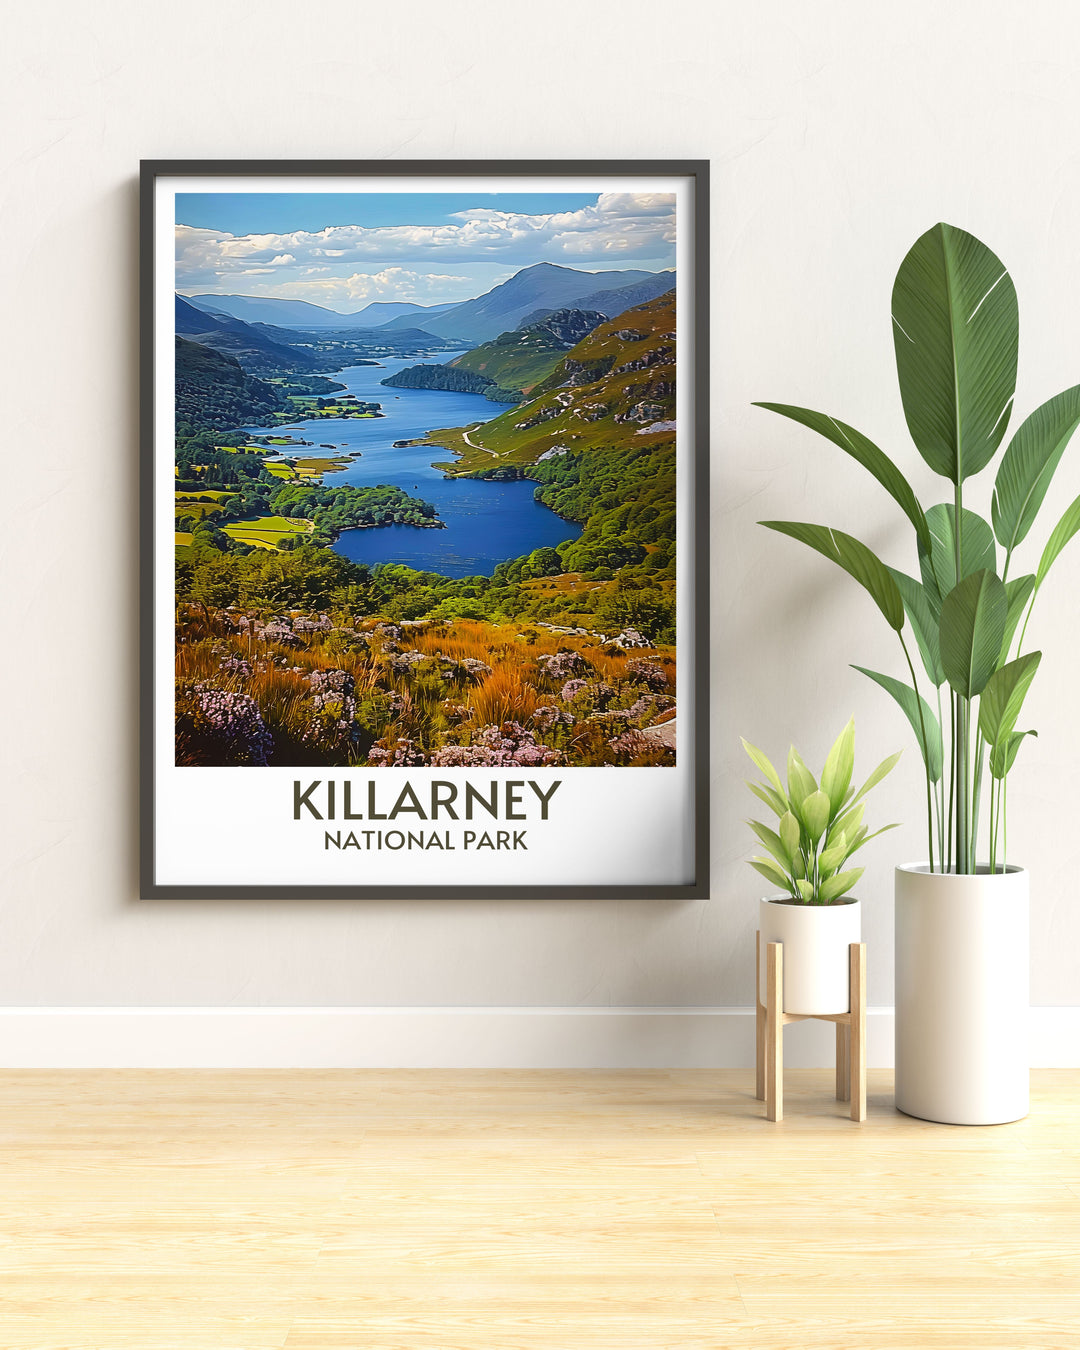 Travel poster of Killarney National Park highlighting famous sites like the Ring of Kerry and the McGillycuddy Reeks